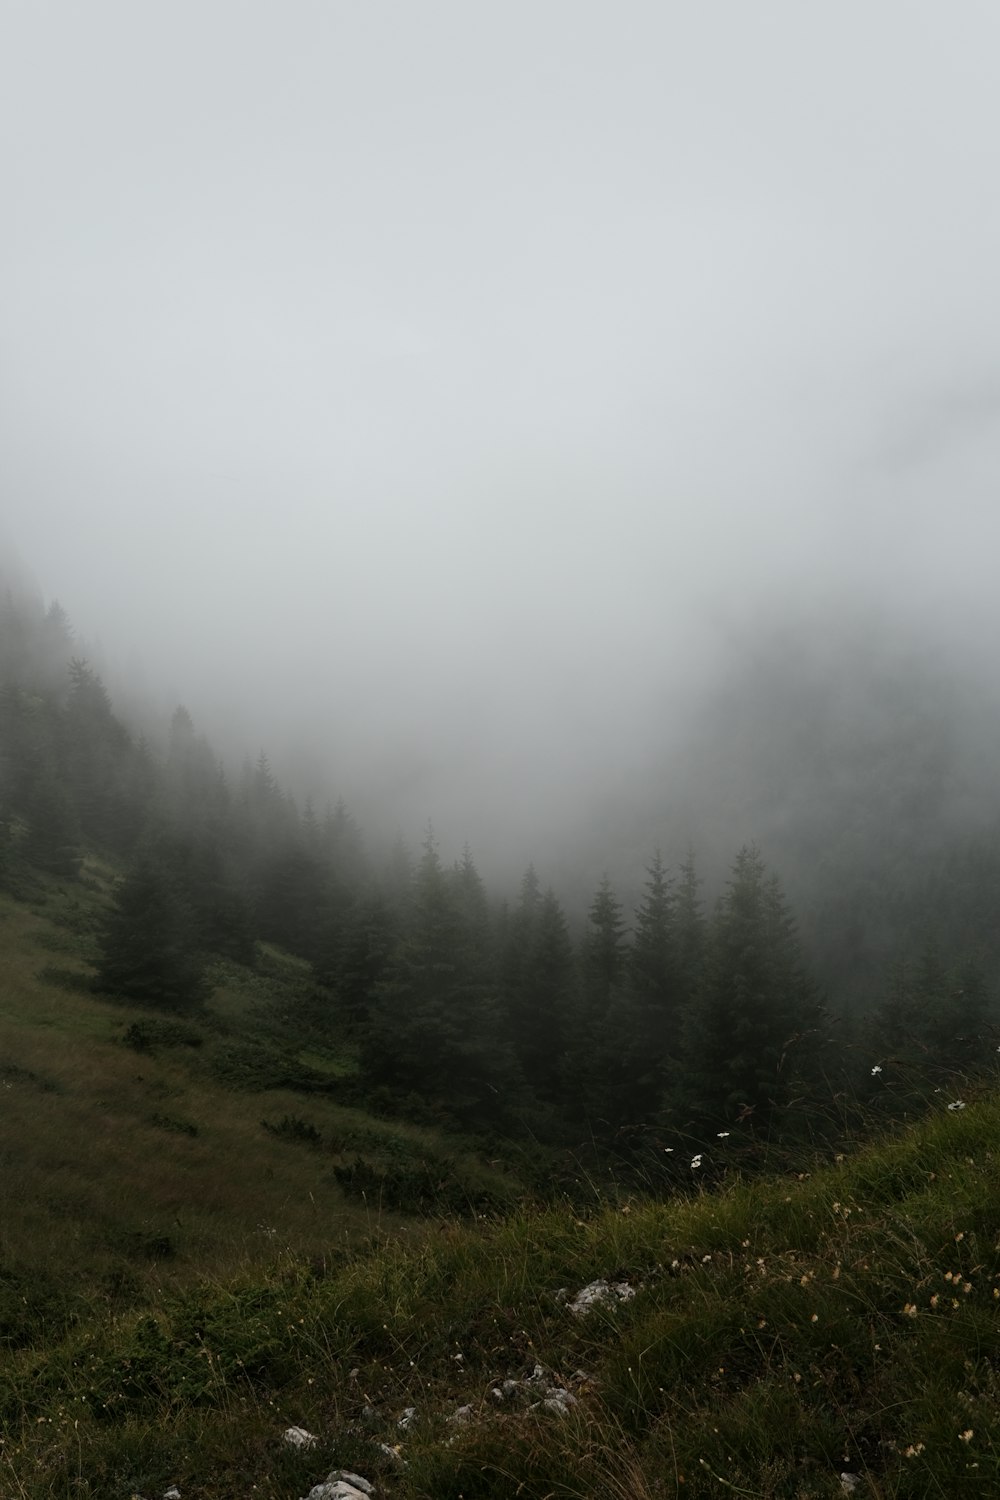 a foggy mountain landscape with trees and grass